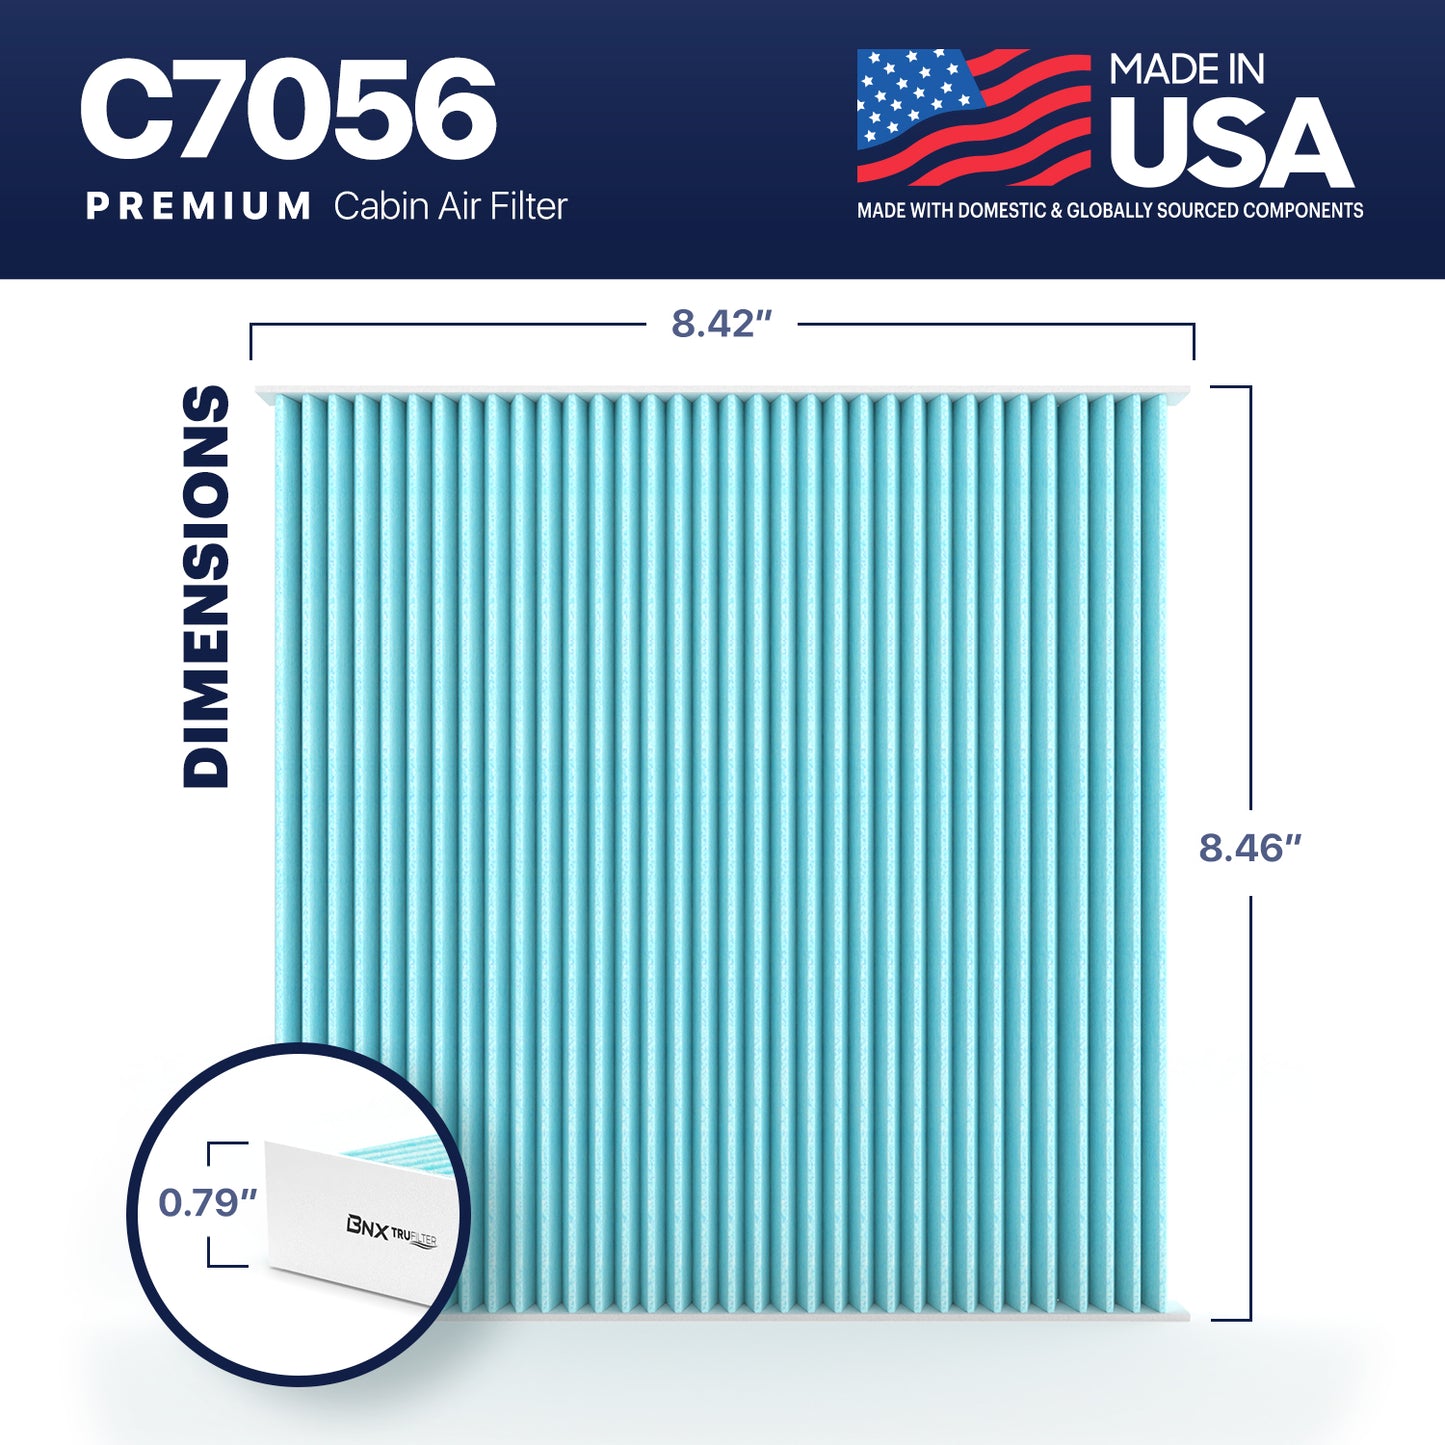 BNX TruFilter C7056 Cabin Air Filter, HEPA 99.97%, MADE IN USA, Compatible With Select Toyota Camry, 4Runner, Prius, Avalon, FJ Cruiser, Celica, Sienna, Solara; Lexus ES330, GX470, RX330, RX350,RX400h